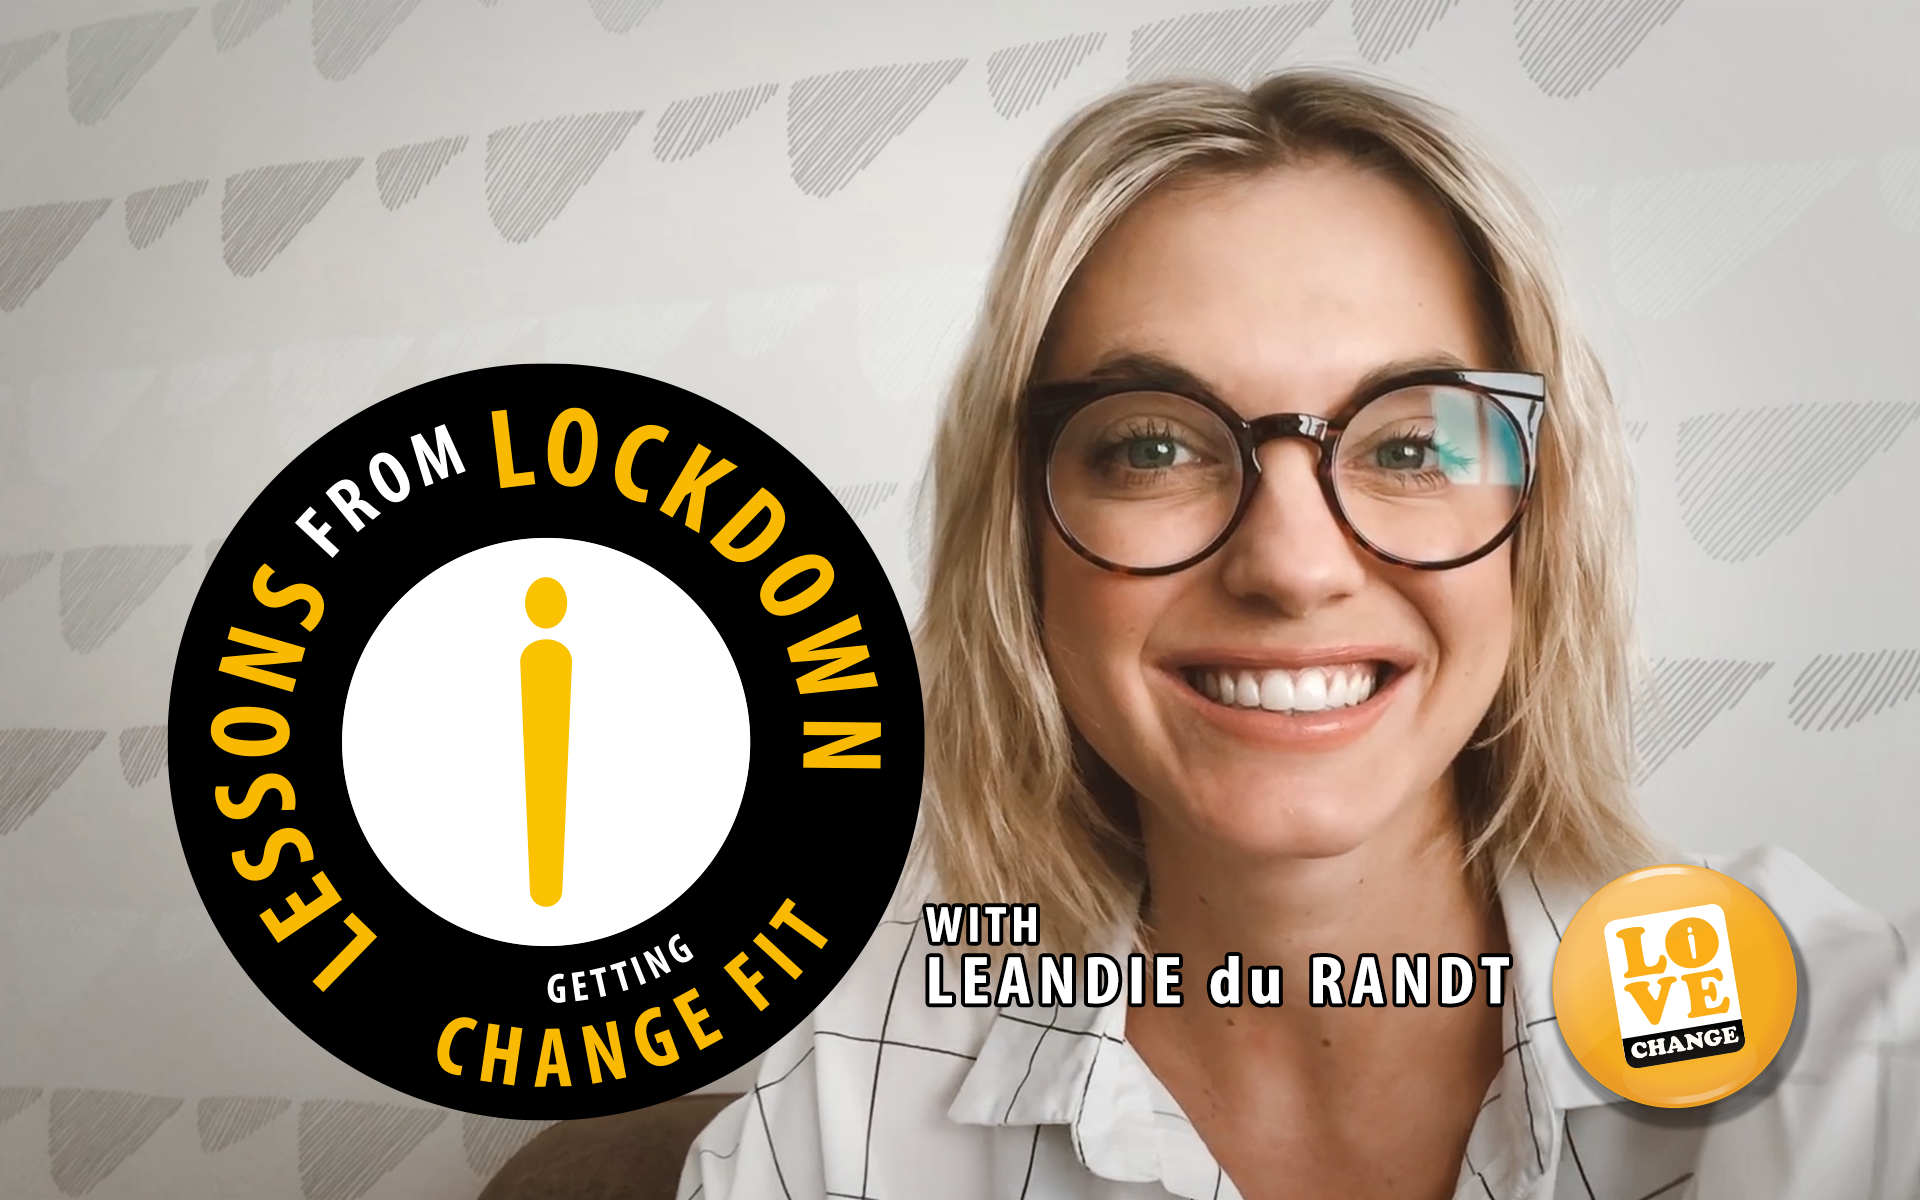 Lessons from lockdown with Leandie